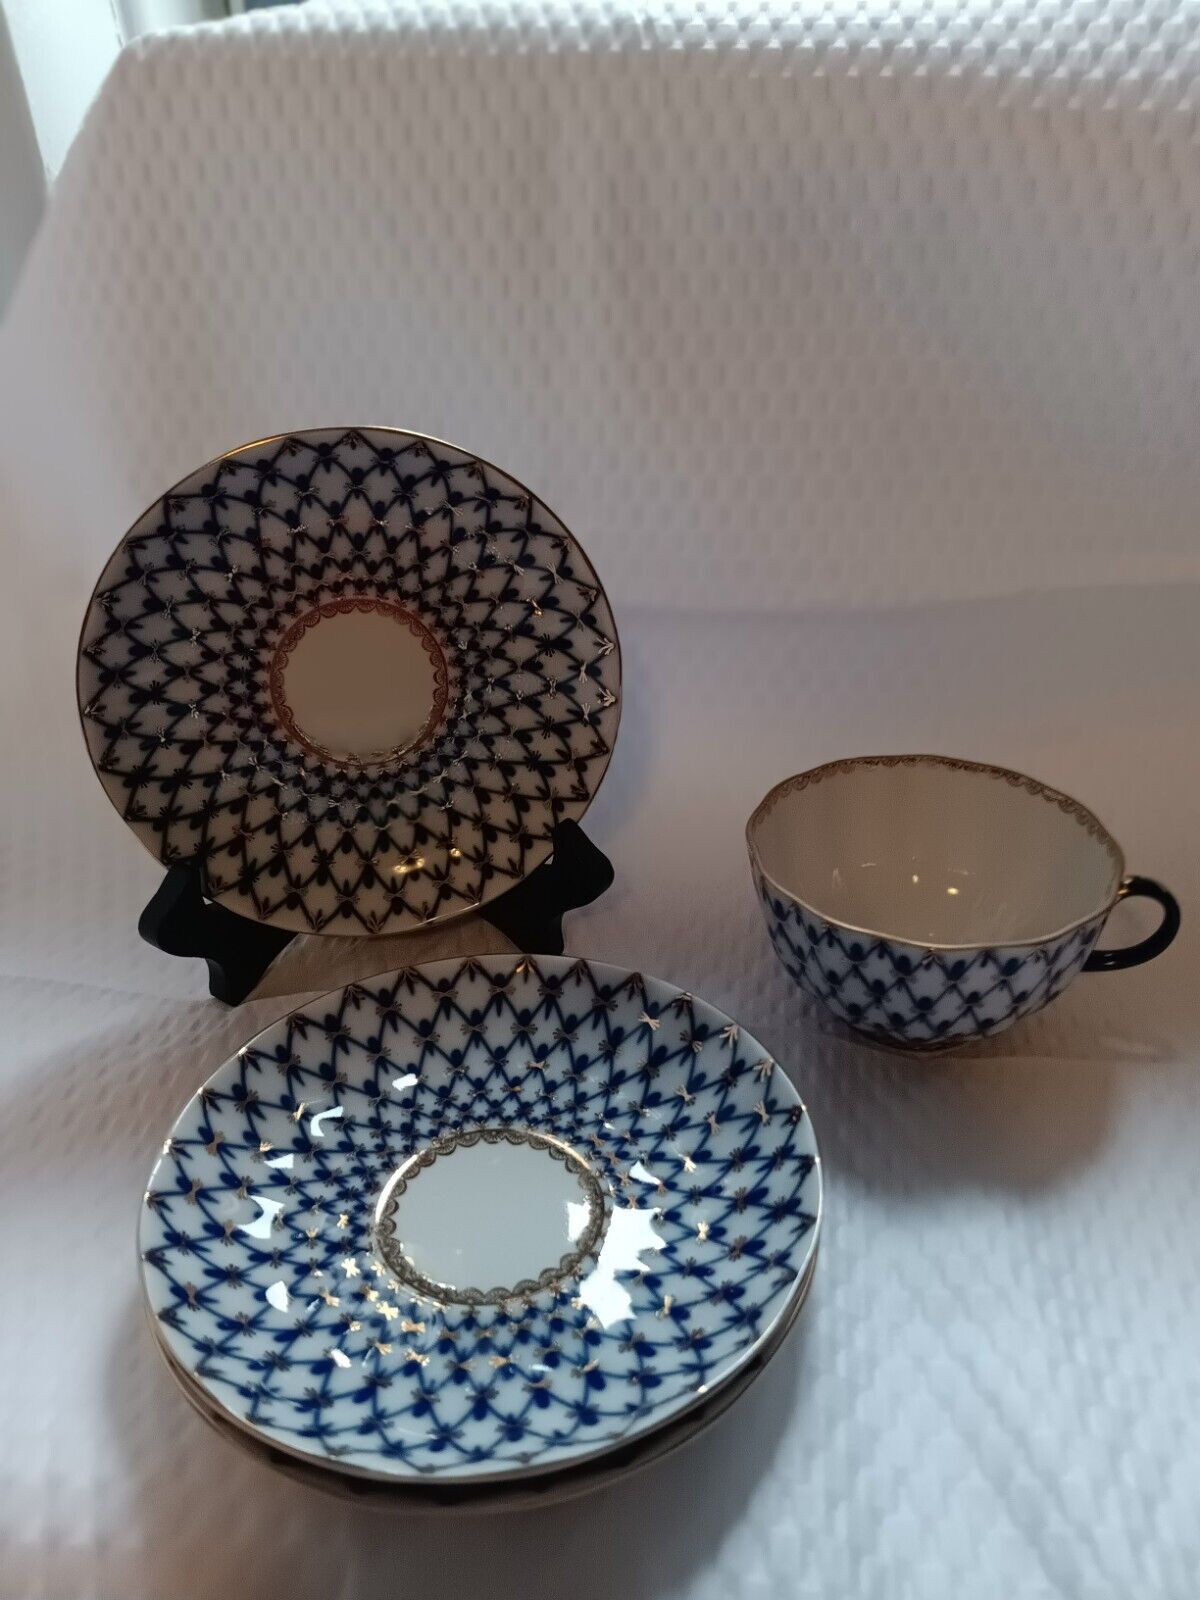 Vintage Russian Imperial Porcelain of St Petersburg Russia - Cup & 3 Saucers